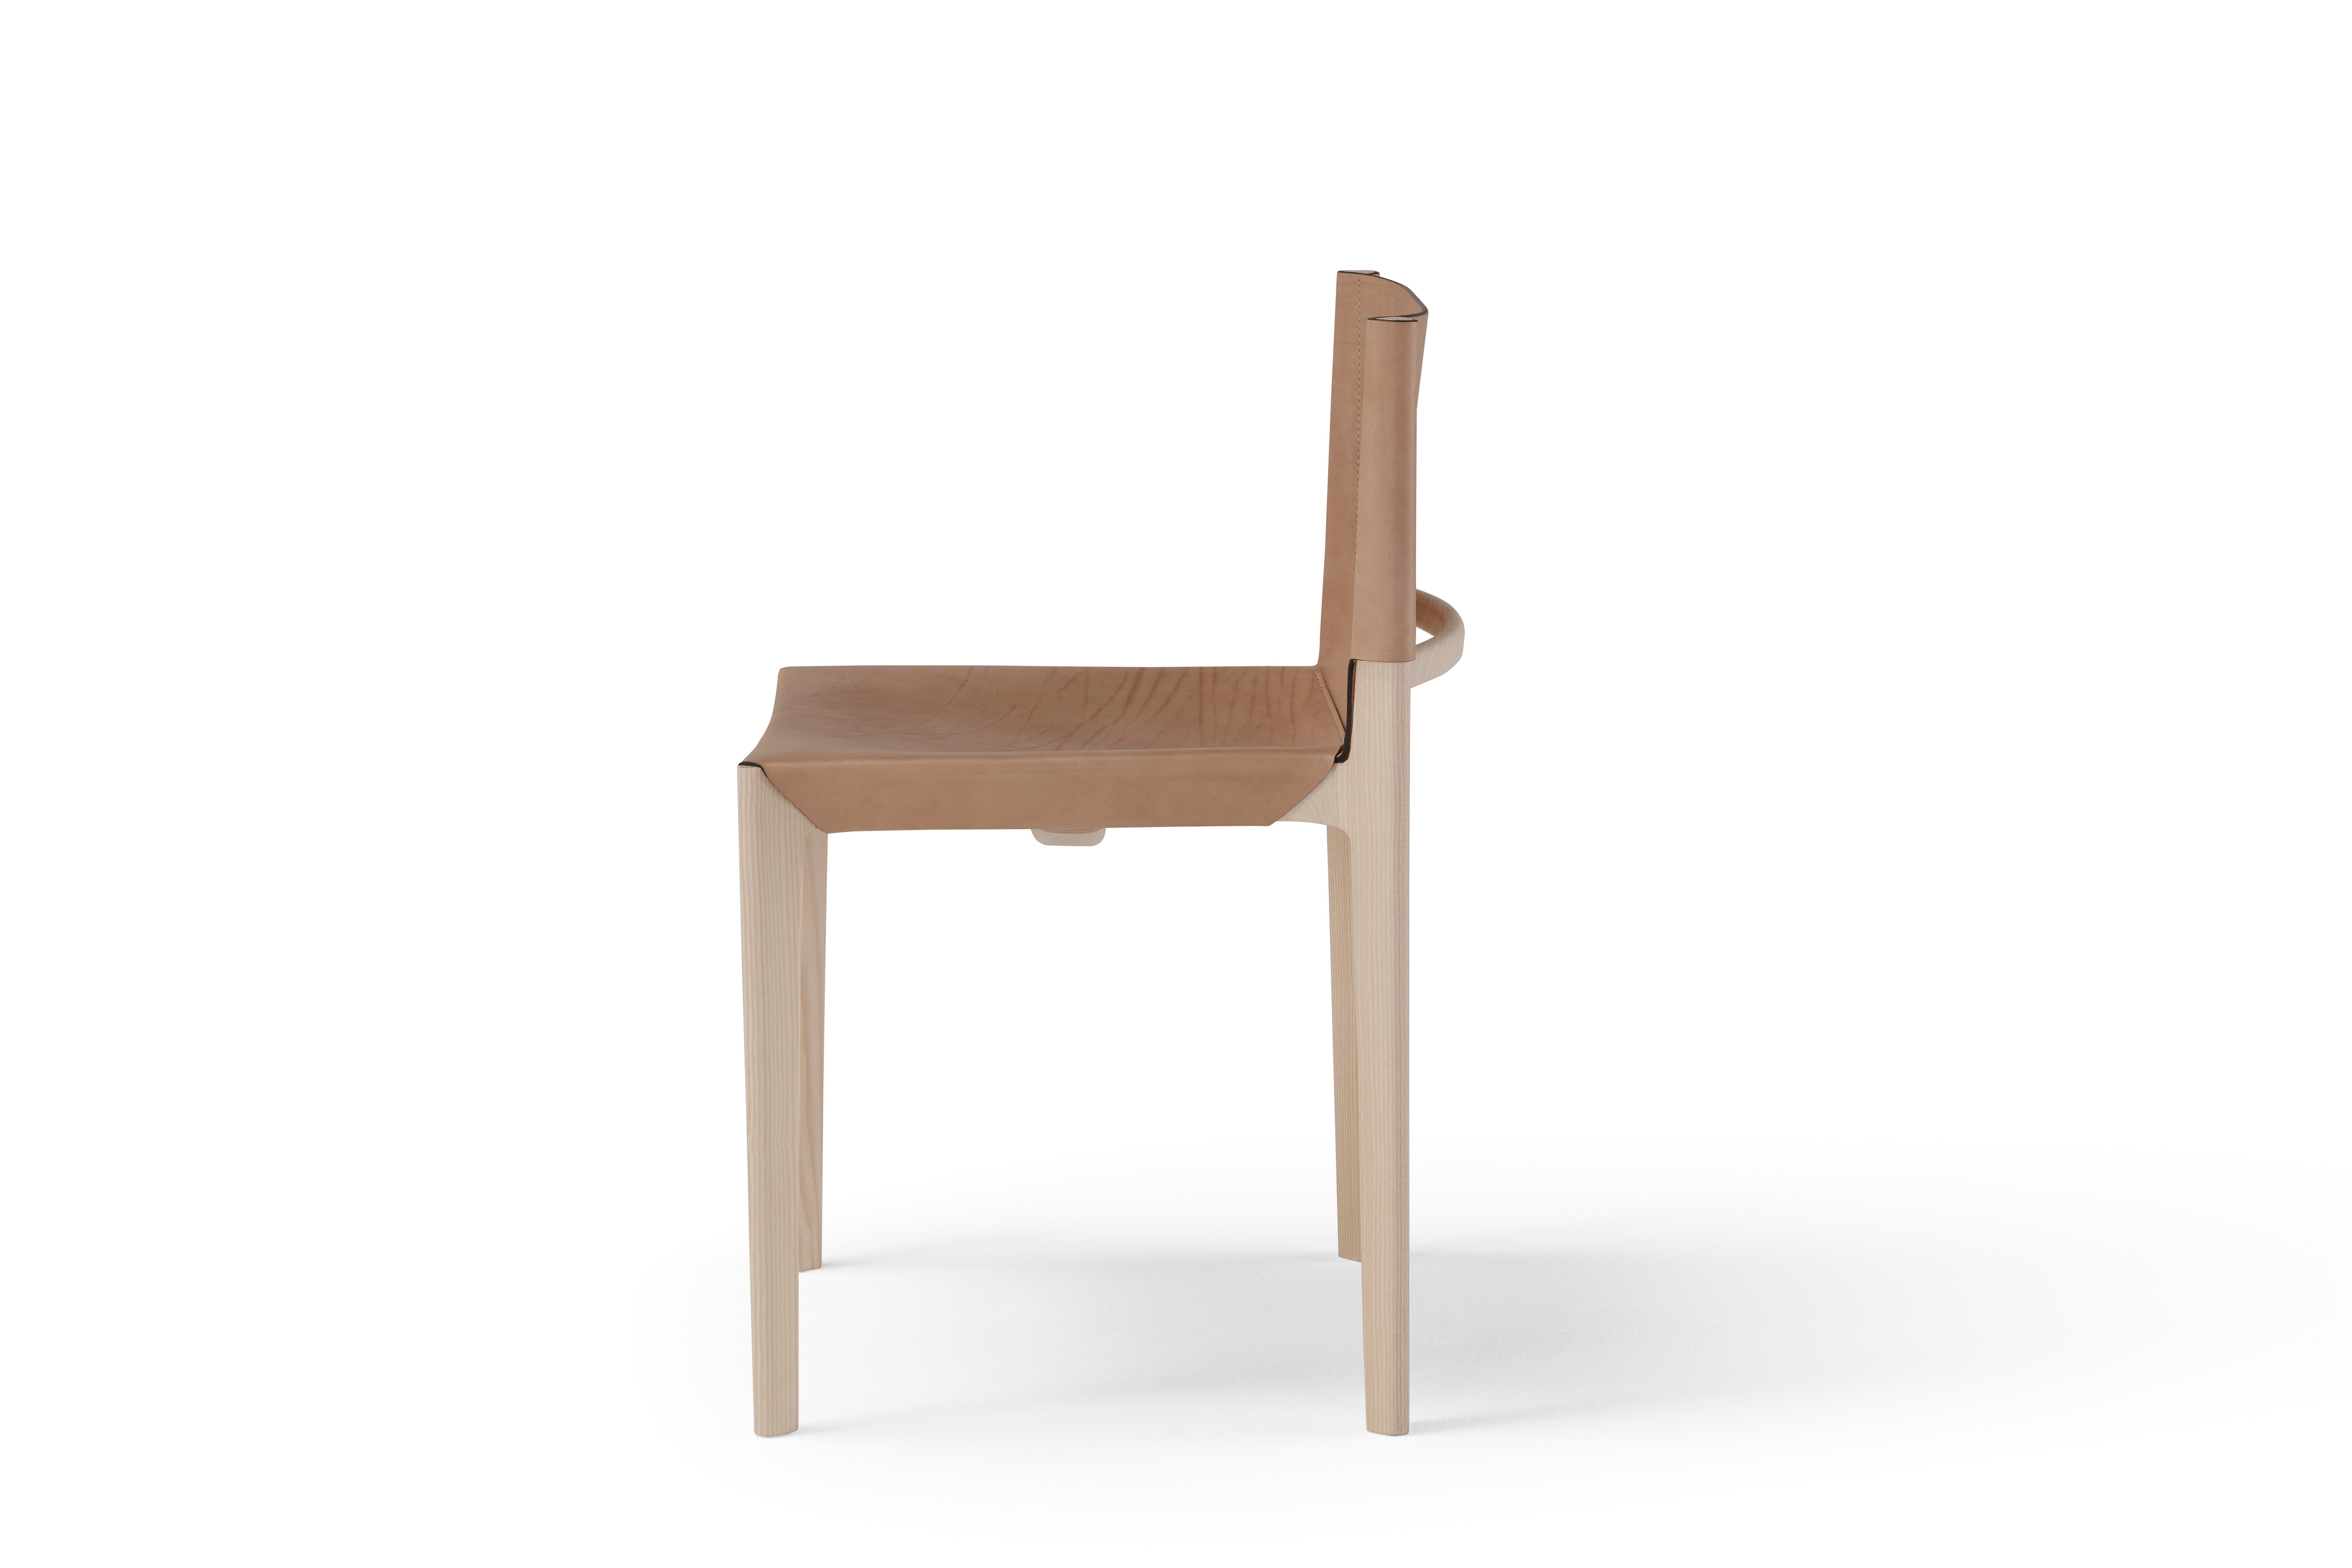 Italian Contemporary Wooden Chair 'Stilt', Cuoio Leather For Sale